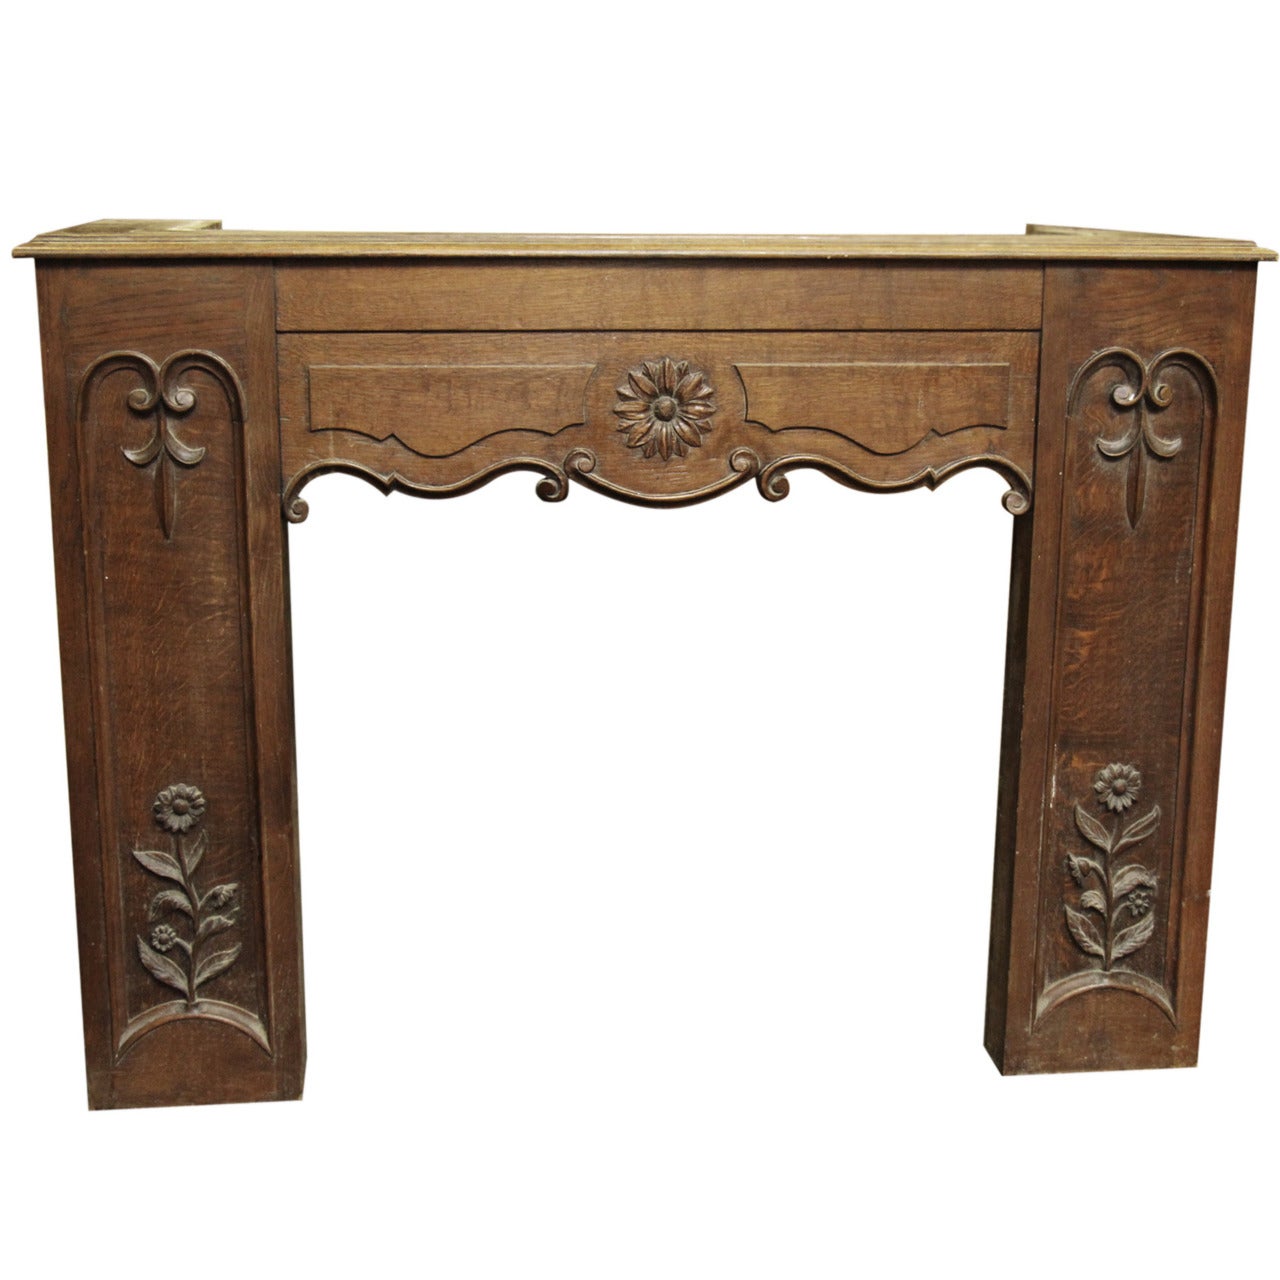 1930s Carved Wooden Chimney Mantel with Floral and Rose Detailing